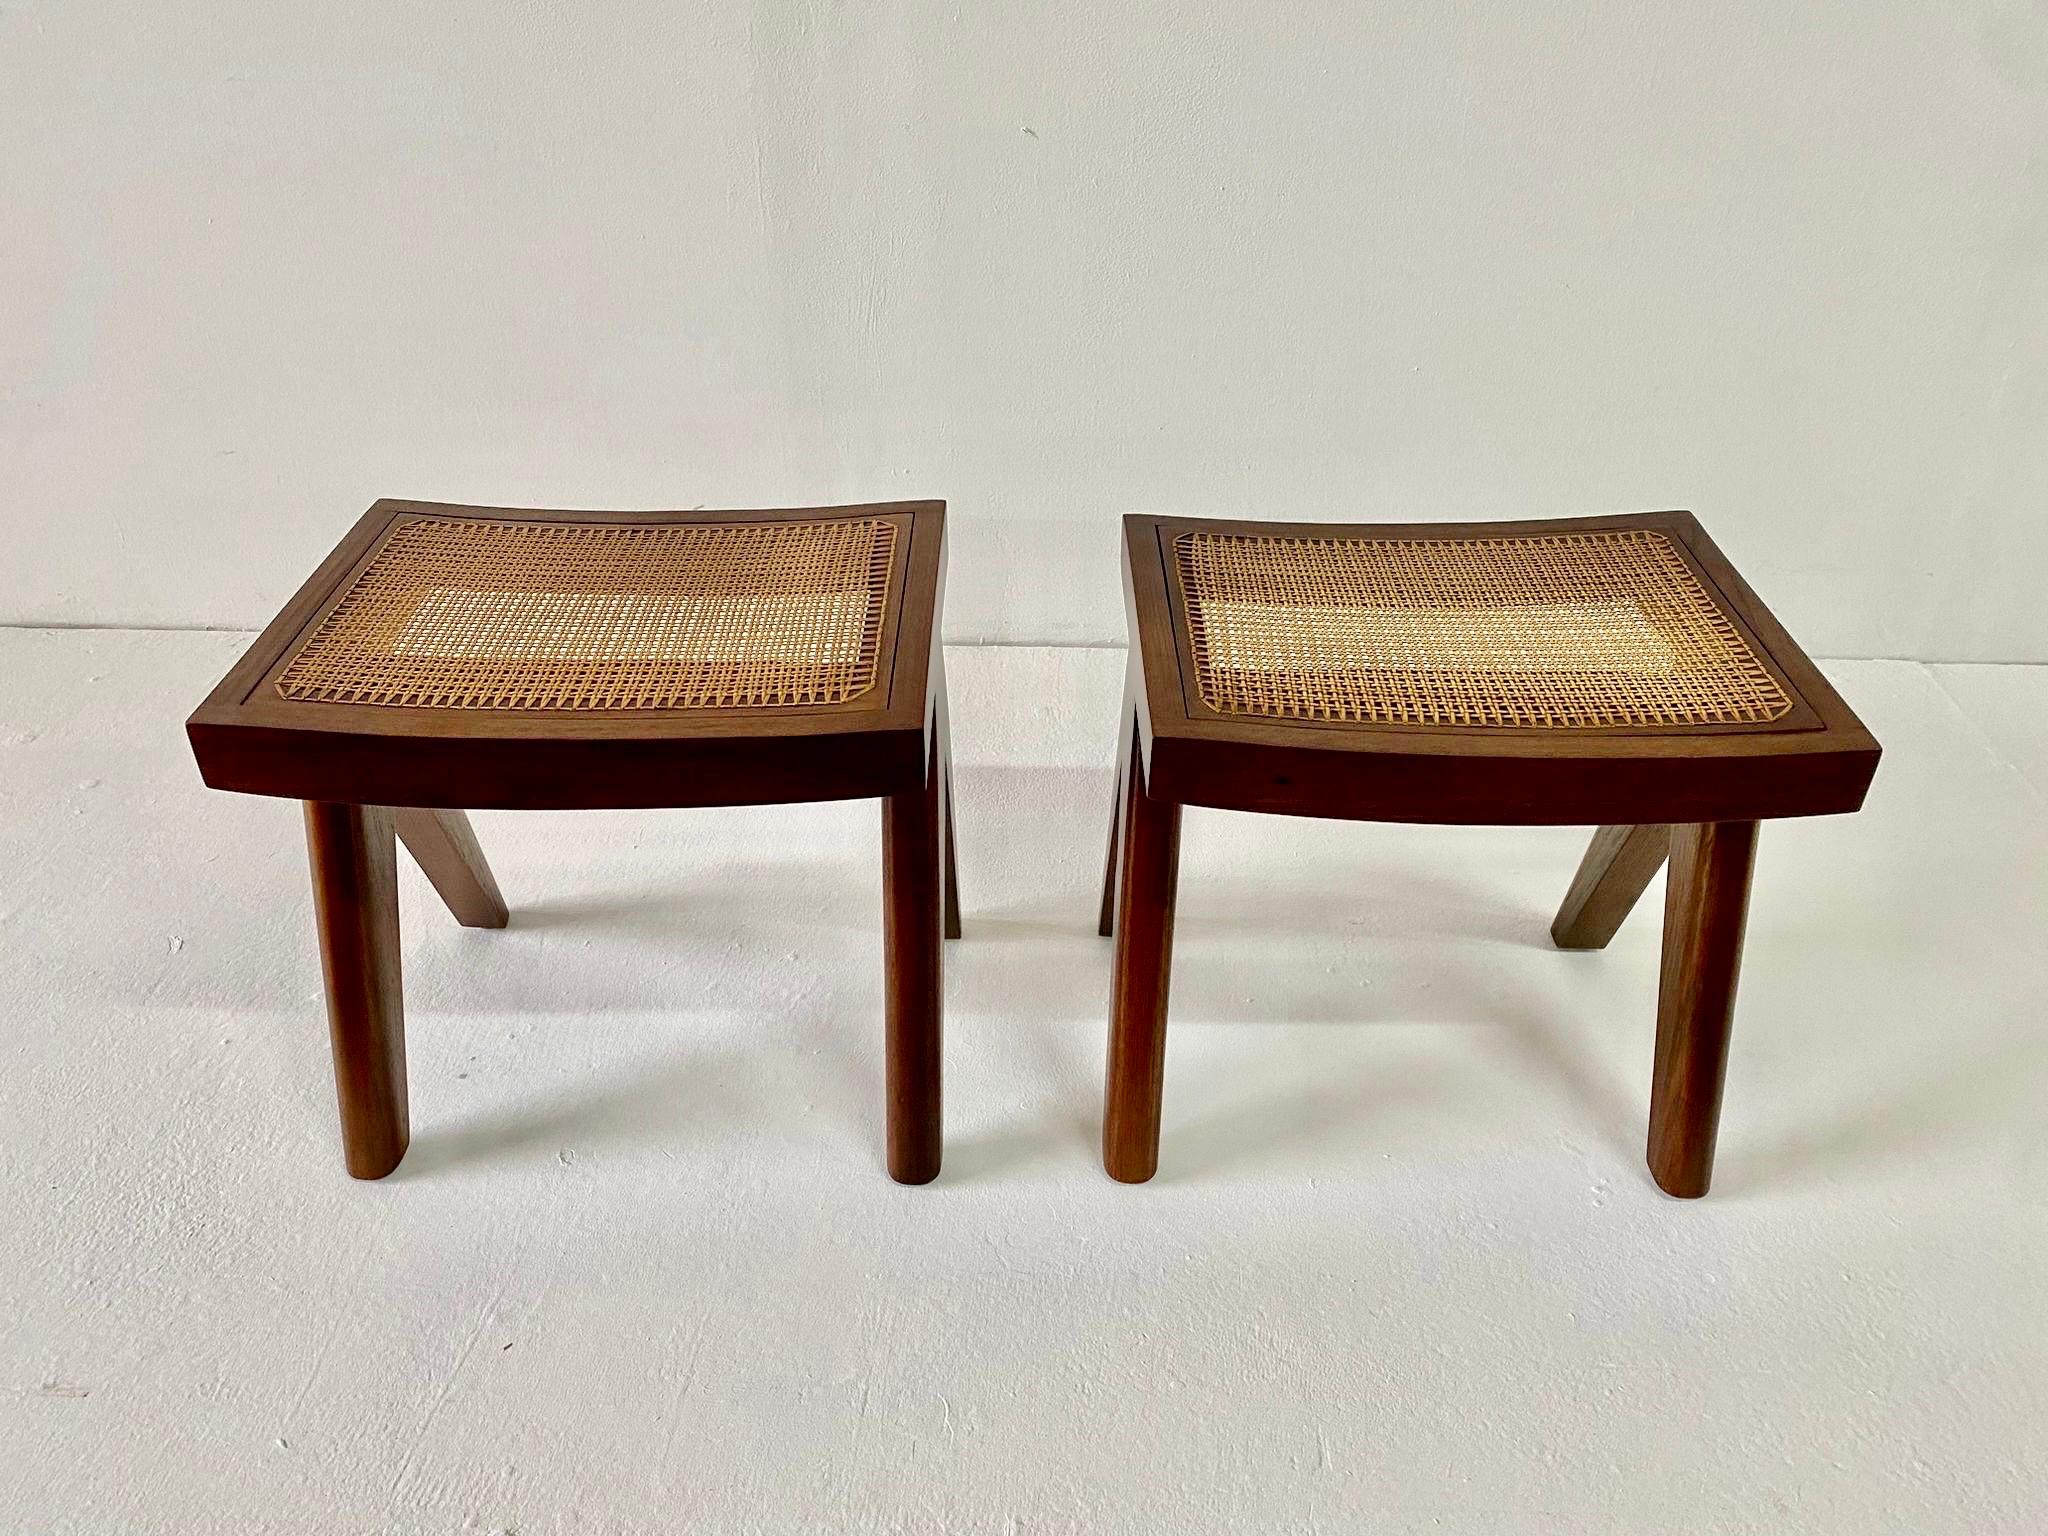 Studio Made Heavy Teak Stools - Manner of Jeanneret (2 Pairs Available) For Sale 4